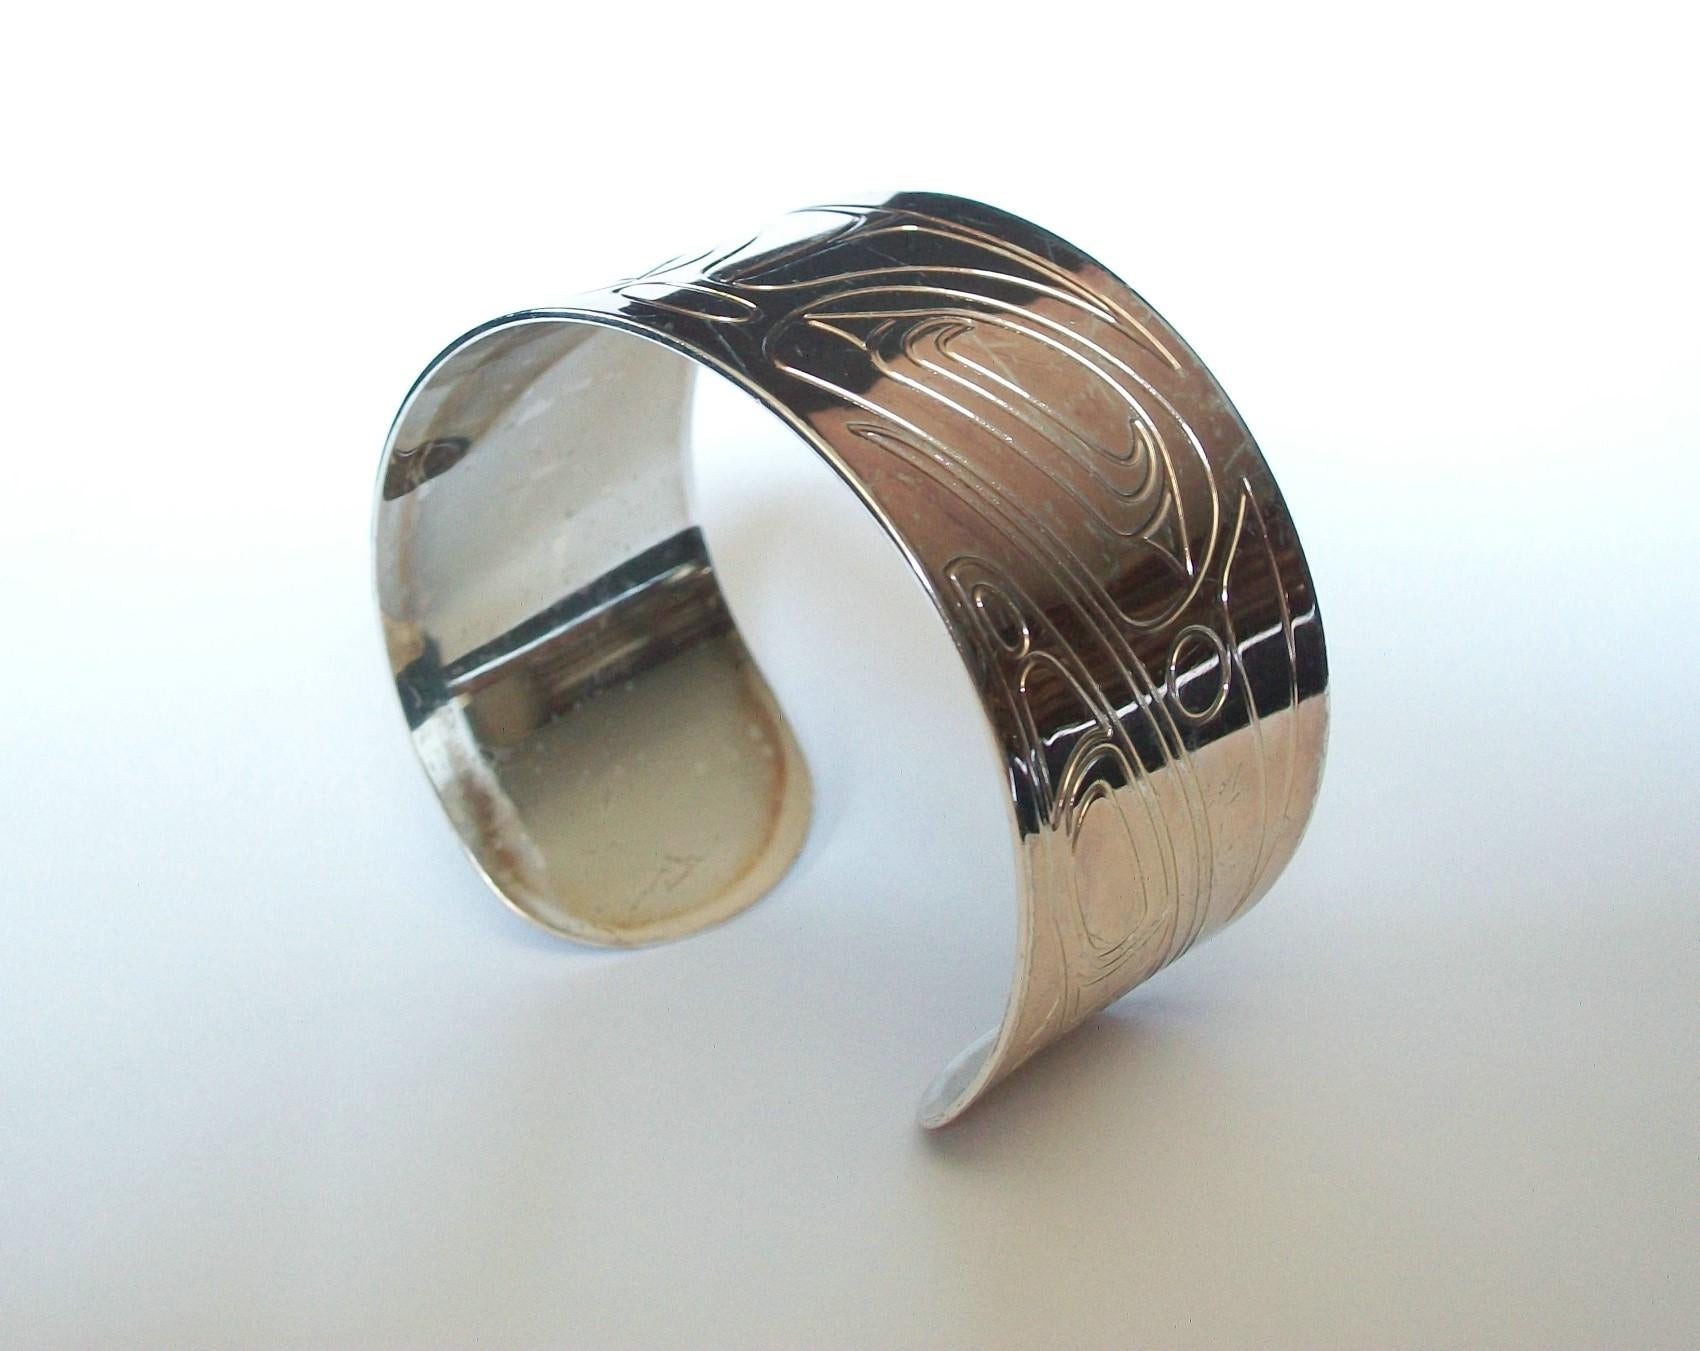 COREY W. MORAES (Designer) - Tsimshian - Canadian Aboriginal white metal cuff bracelet - stamped raven design to the entire band face - fits a small wrist - signed on the back of the band - online retailers mark - Canada (Pacific Northwest) - circa